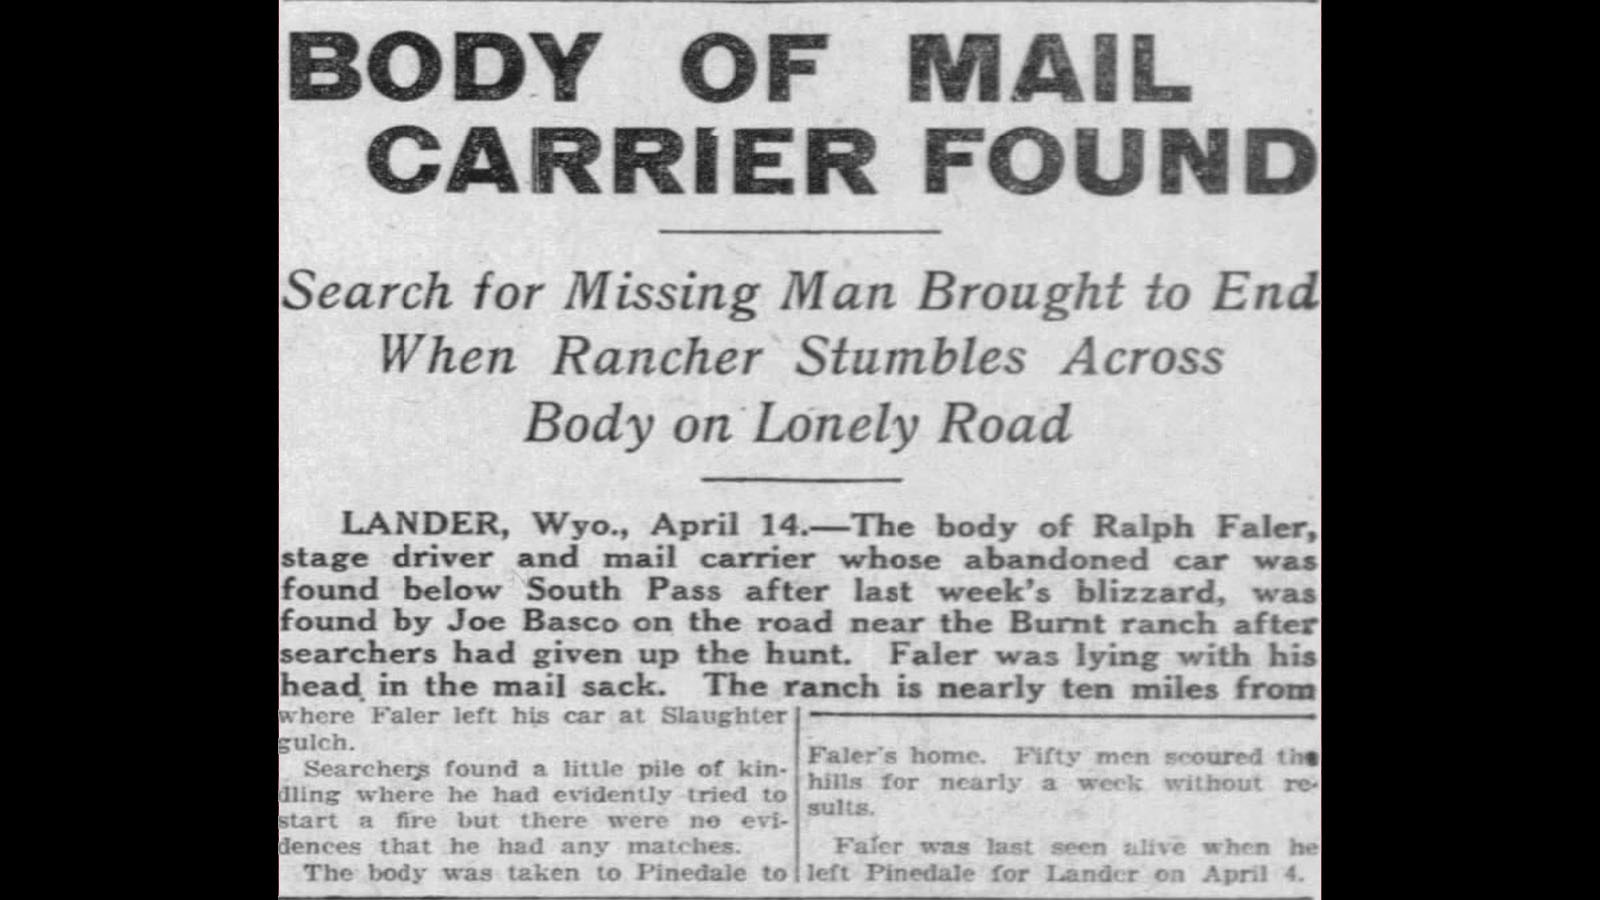 The Casper Daily Tribune carried a front page story about Ralph Faler’s death in its April 14, 1921, edition.